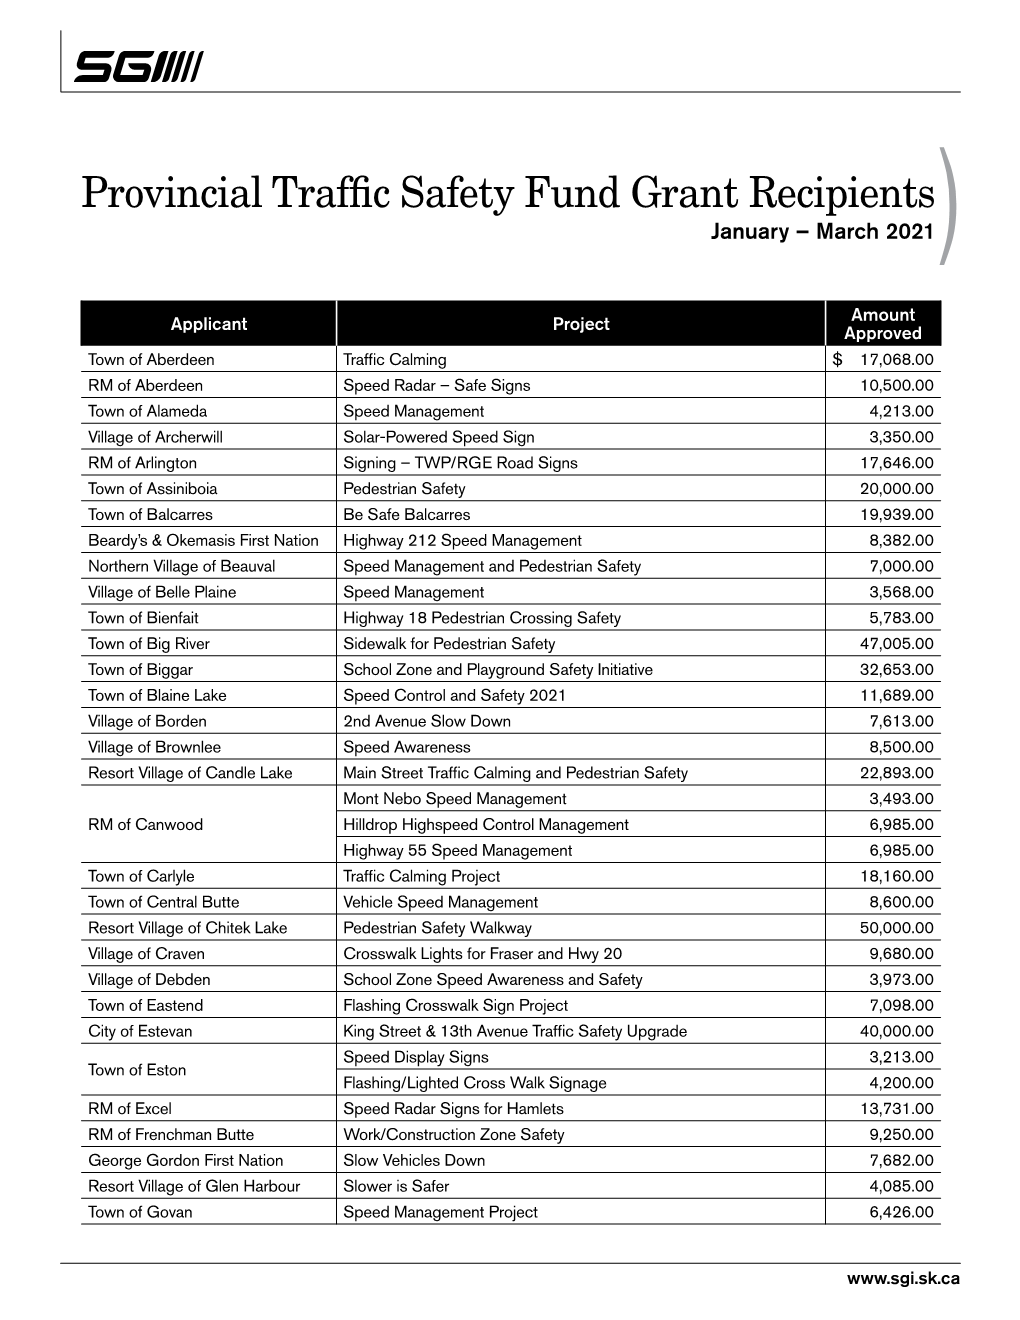 Provincial Traffic Safety Fund Grant Recipients January – March 2021